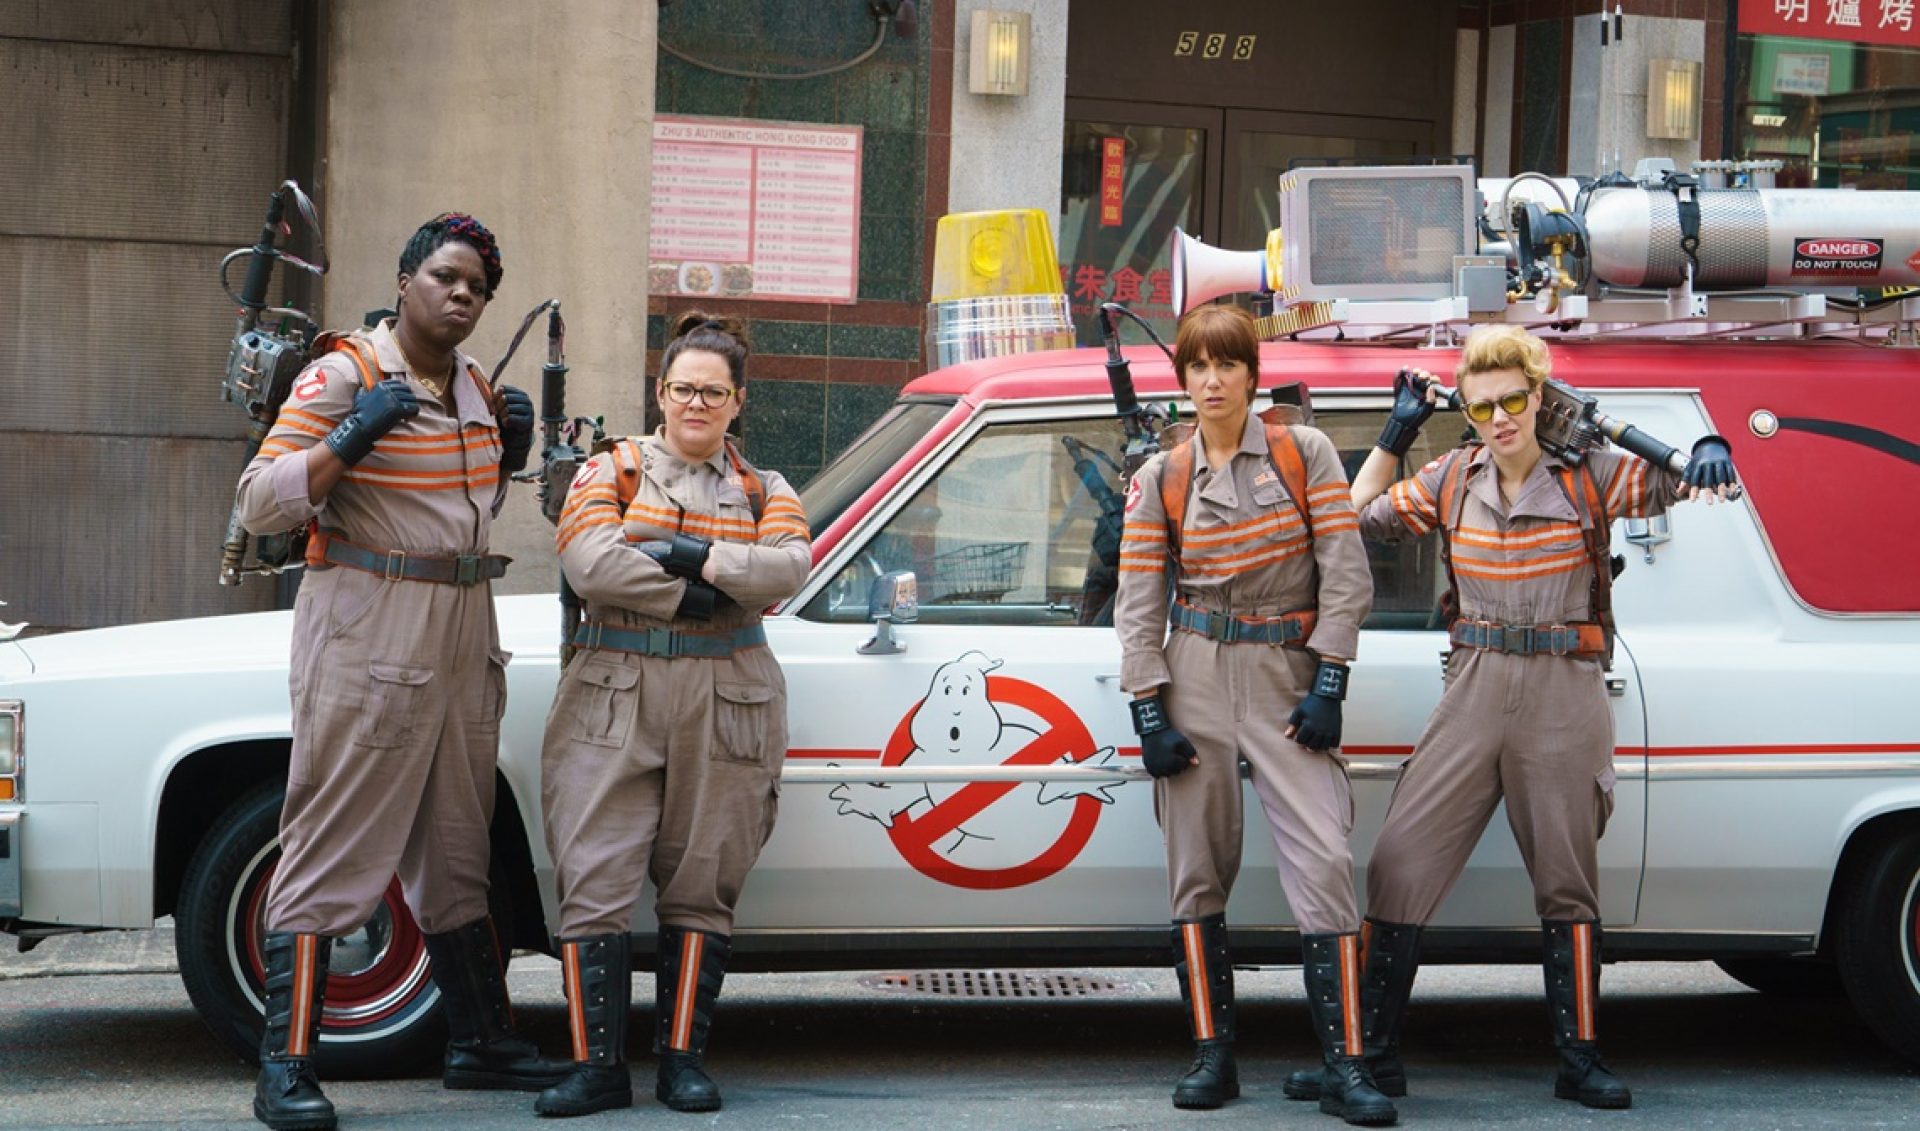 The New ‘Ghostbusters’ Movie Cracks A Joke About Its YouTube Trolls